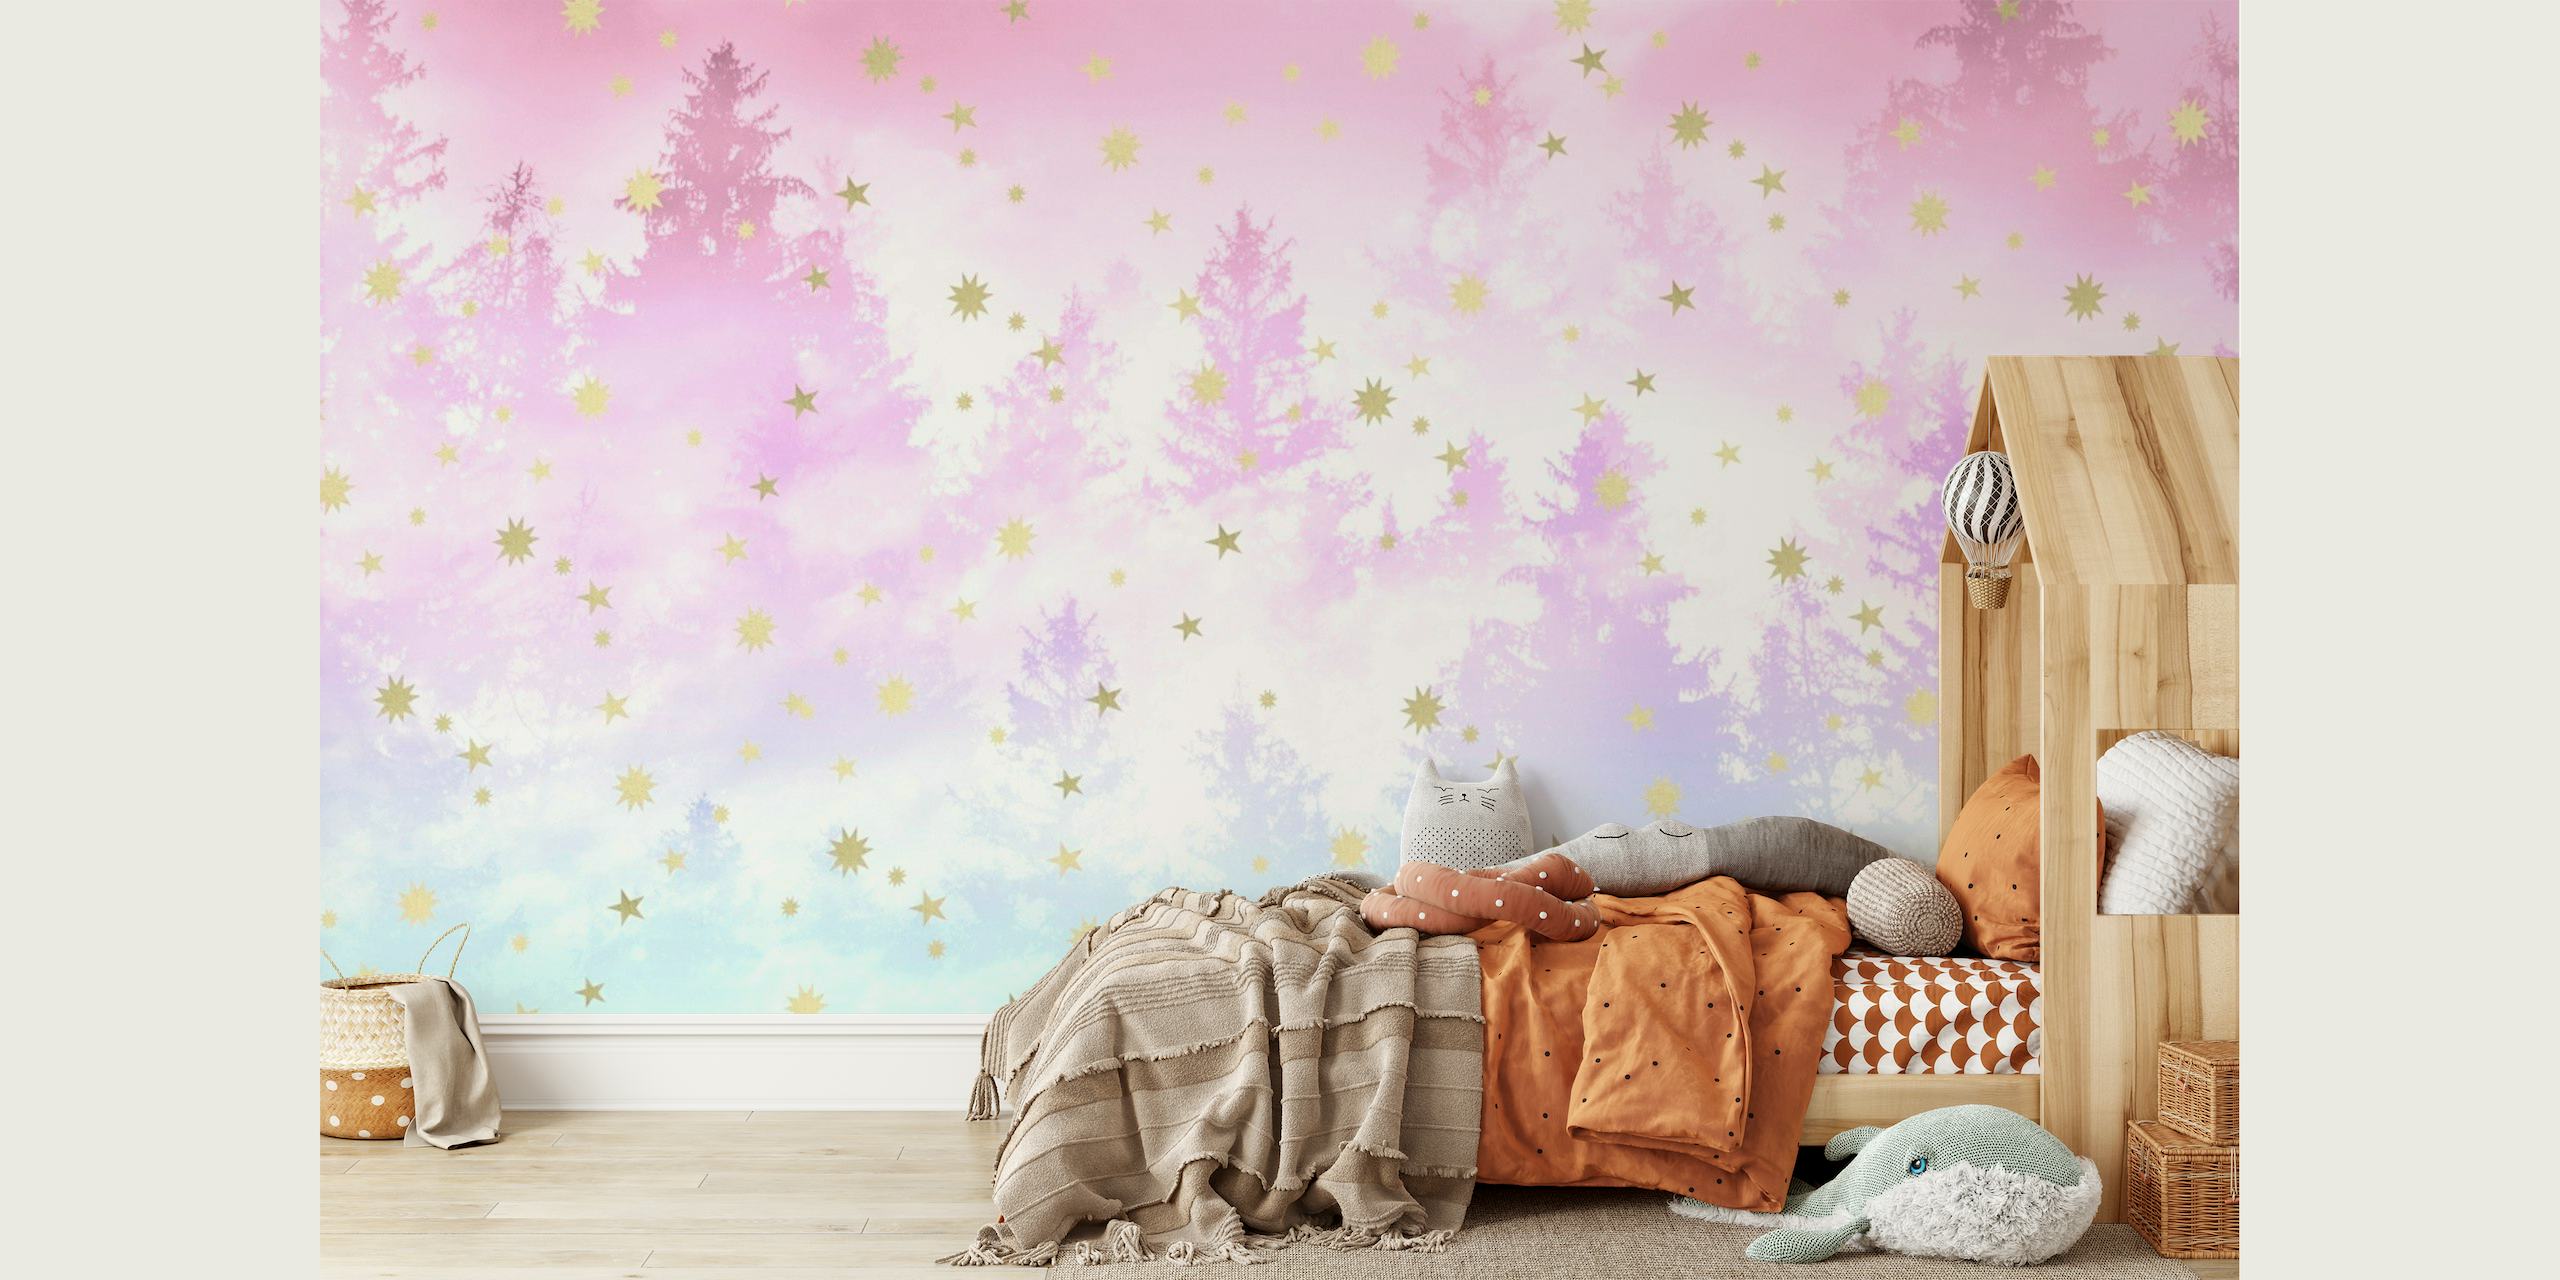 Starry Unicorn Pastel Forest 1 behang